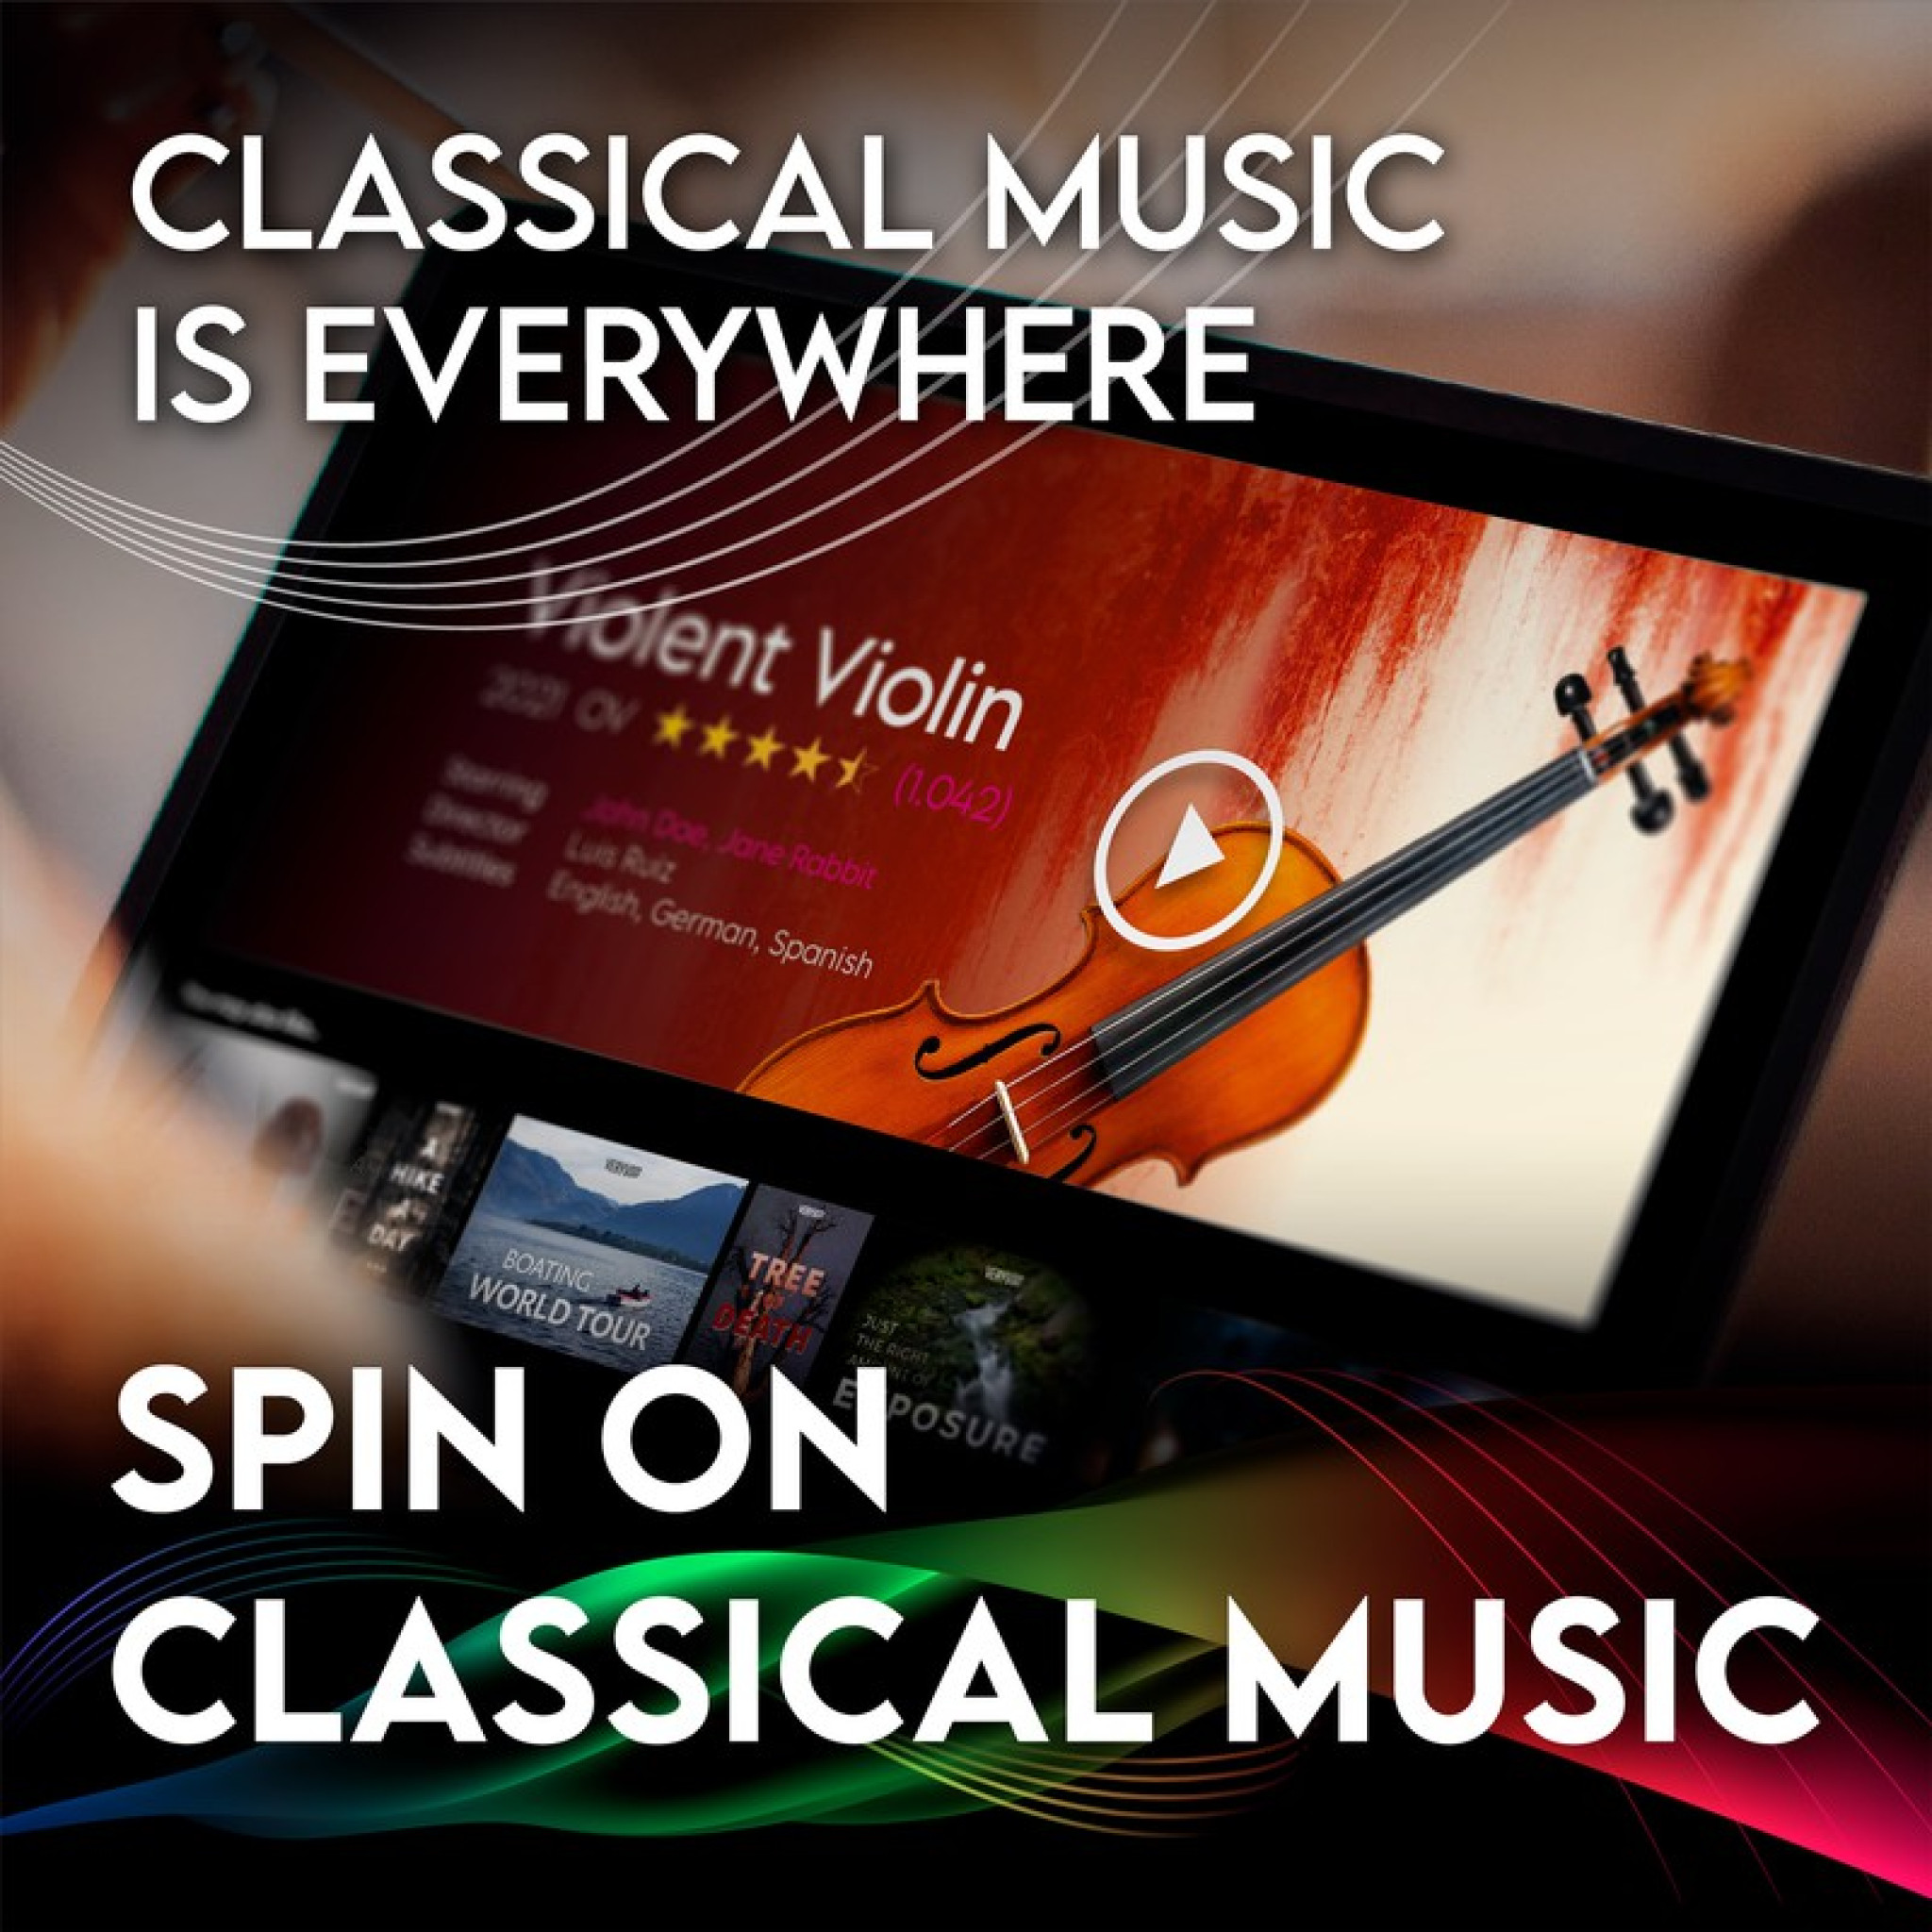 SPIN ON CLASSICAL MUSIC